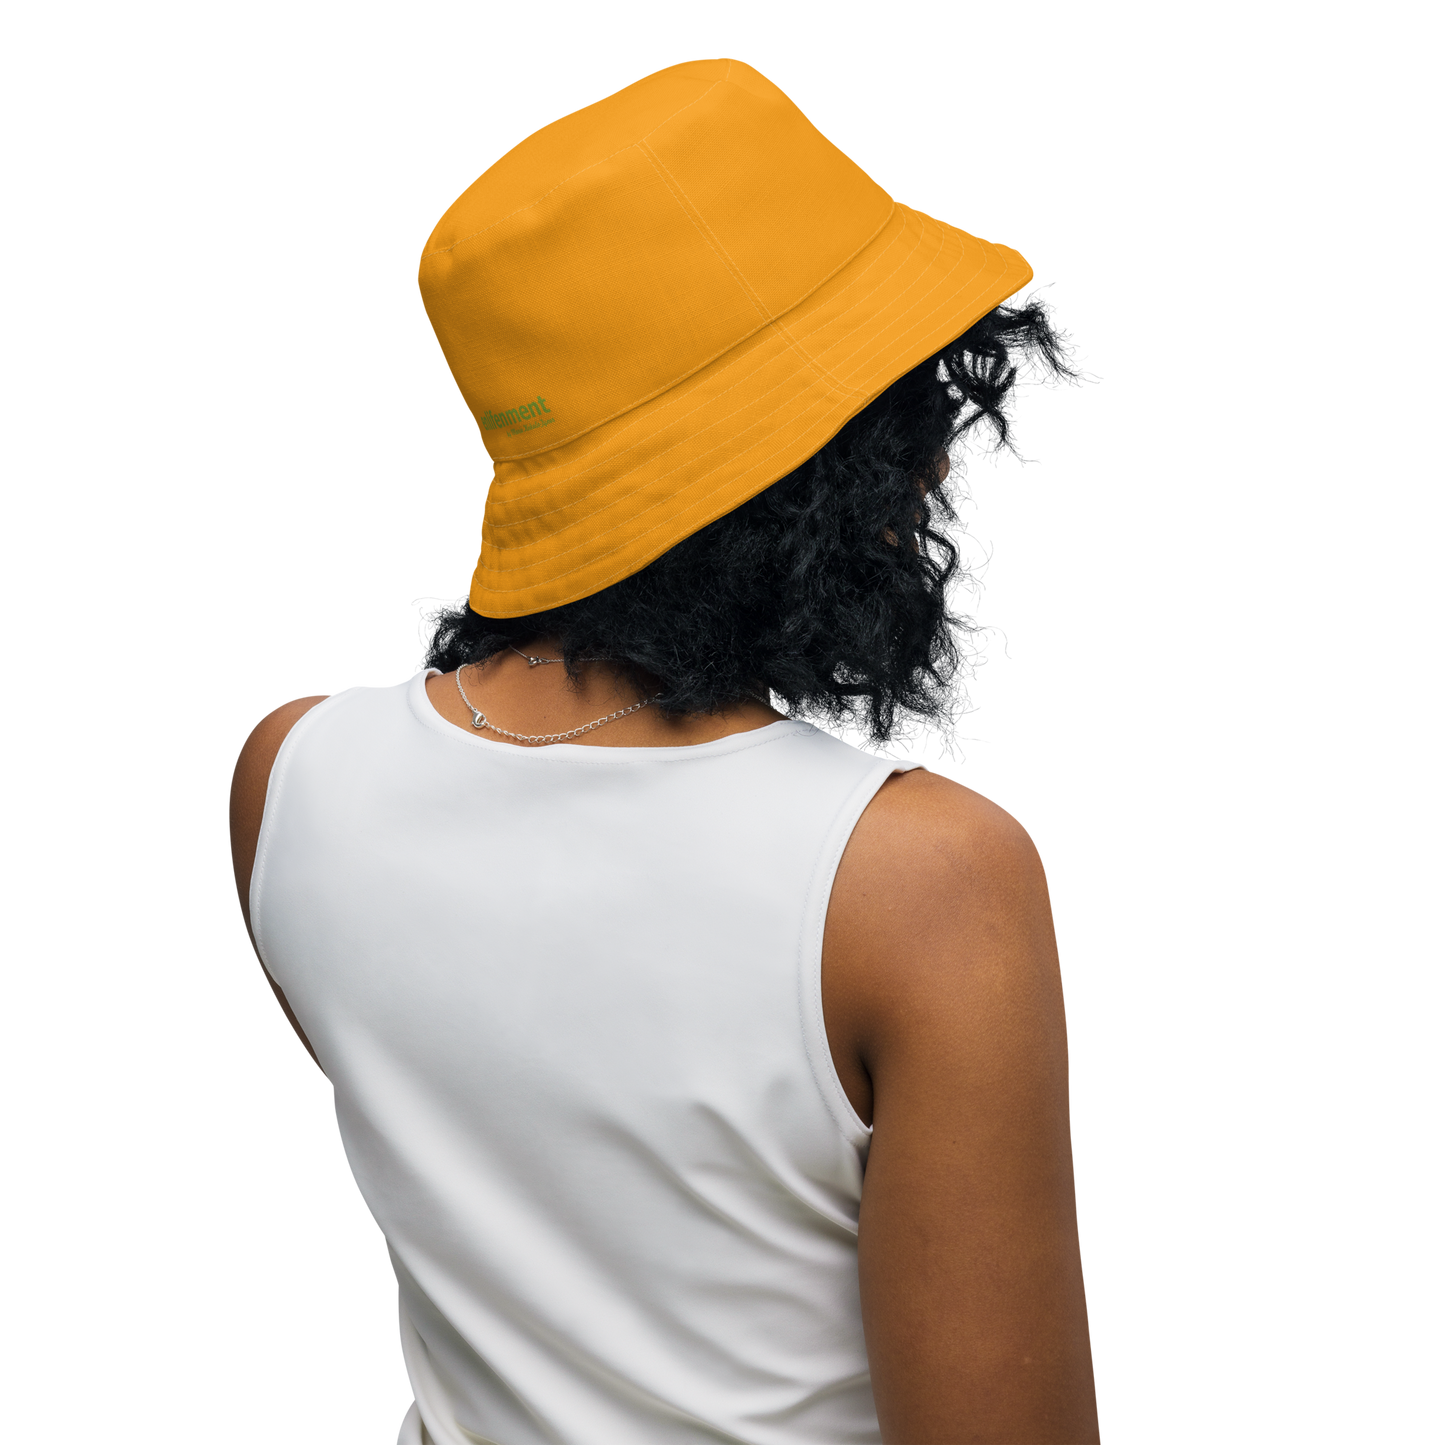 The FLOWER LOVE Collection - "Butterfly on a Bloom" Design Premium Reversible Bucket Hat - Orange Inside - Beach Hat, Gifts for Her